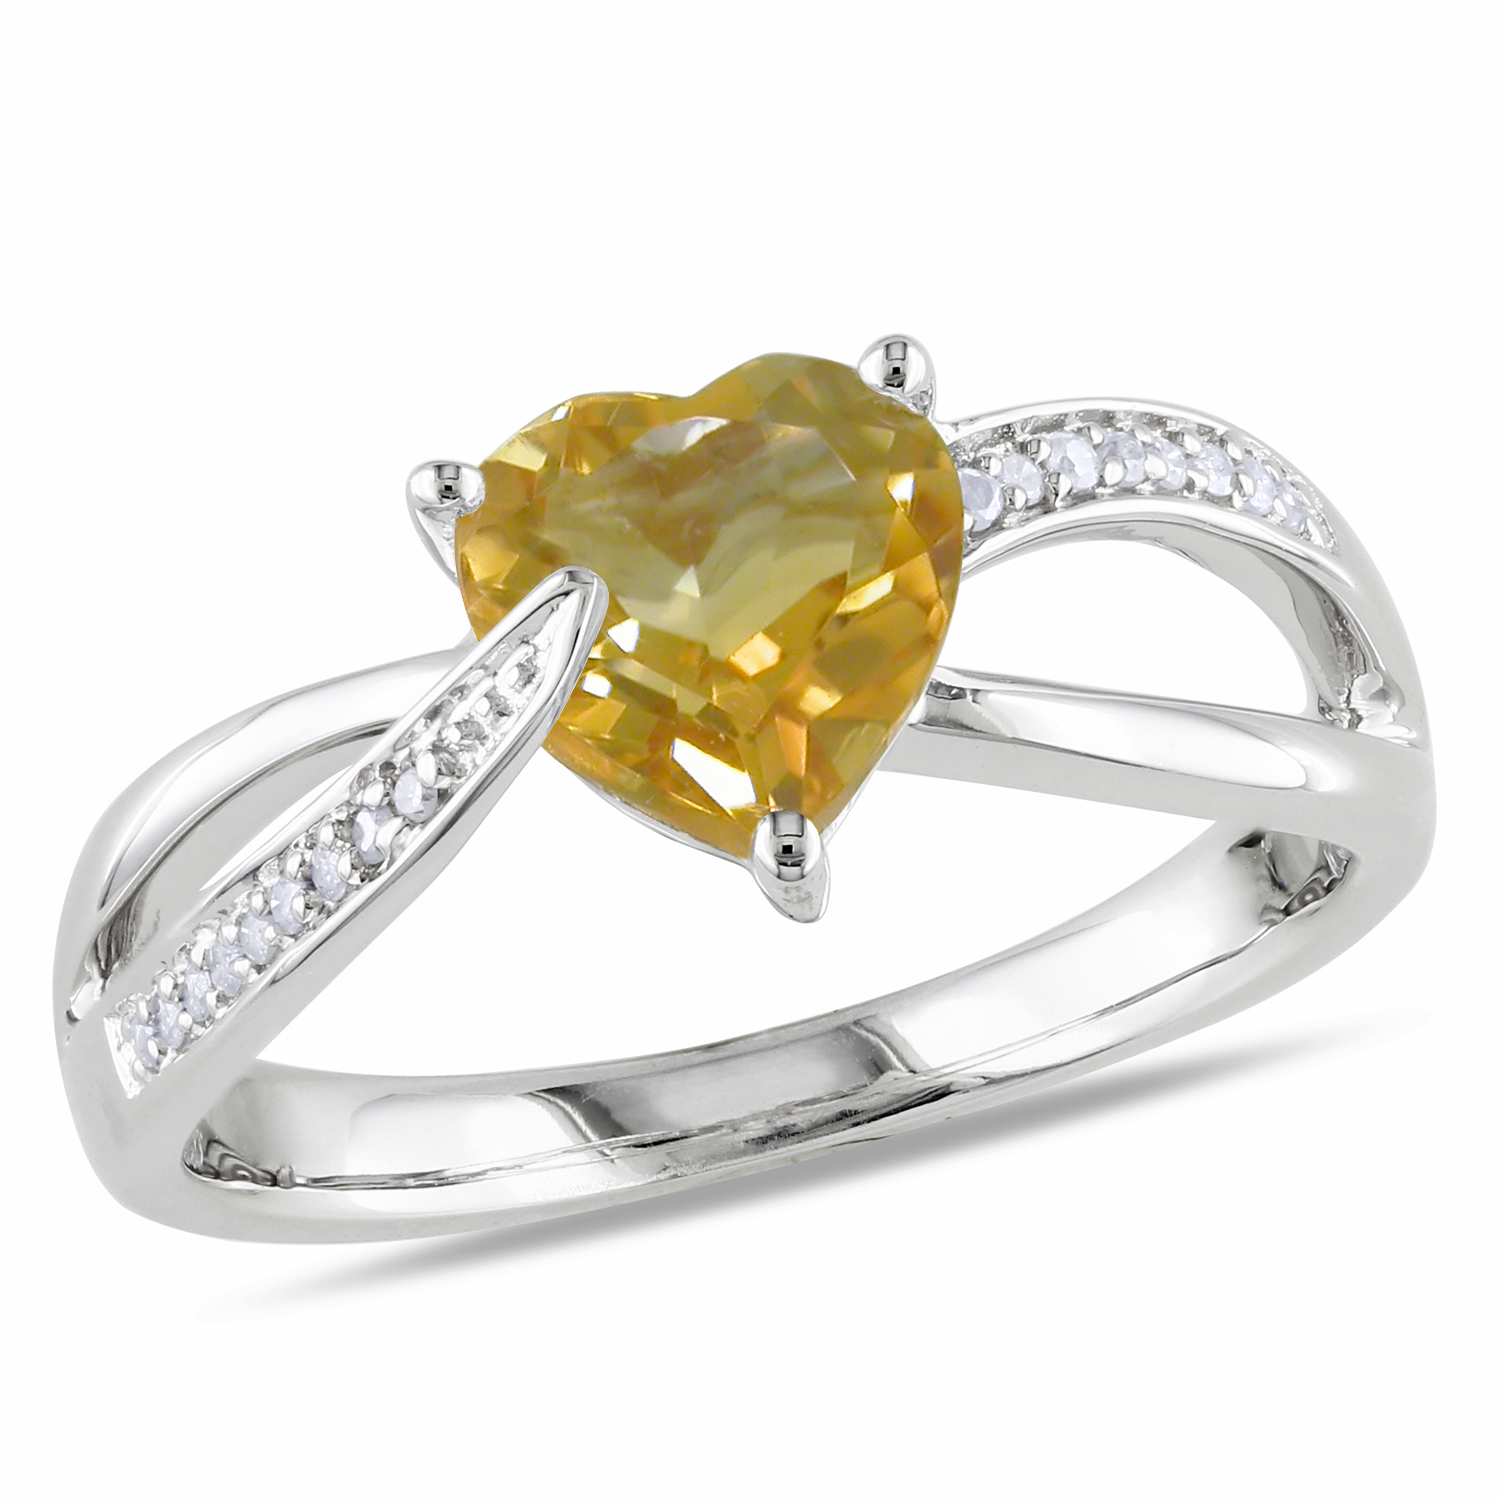 0.05 Carat T.W. Diamond and 1 1/7 Carat T.G.W. Citrine Fashion Ring in Sterling Silver GH I3